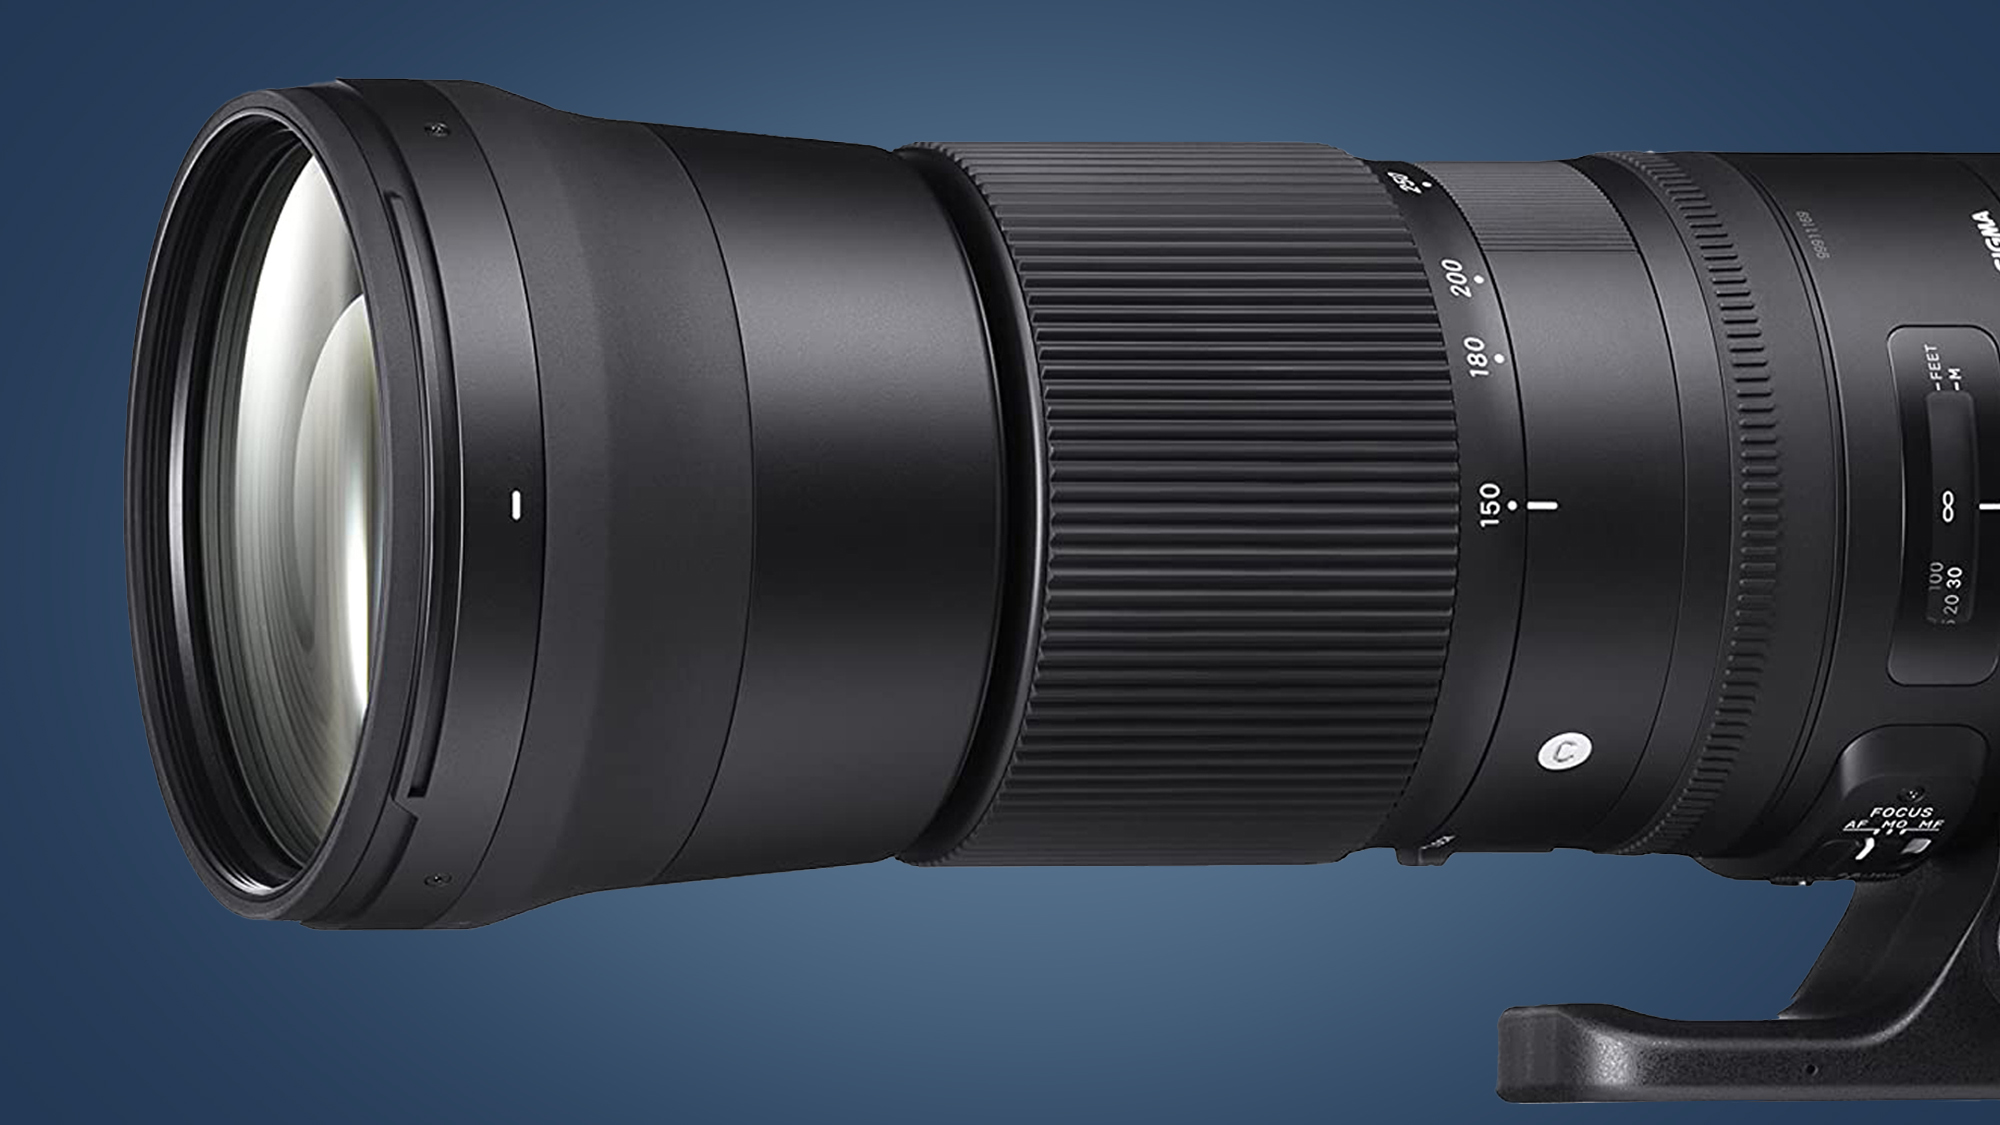 The Sigma 150-600mm f/5-6.3 DG OS HSM lens on a blue background